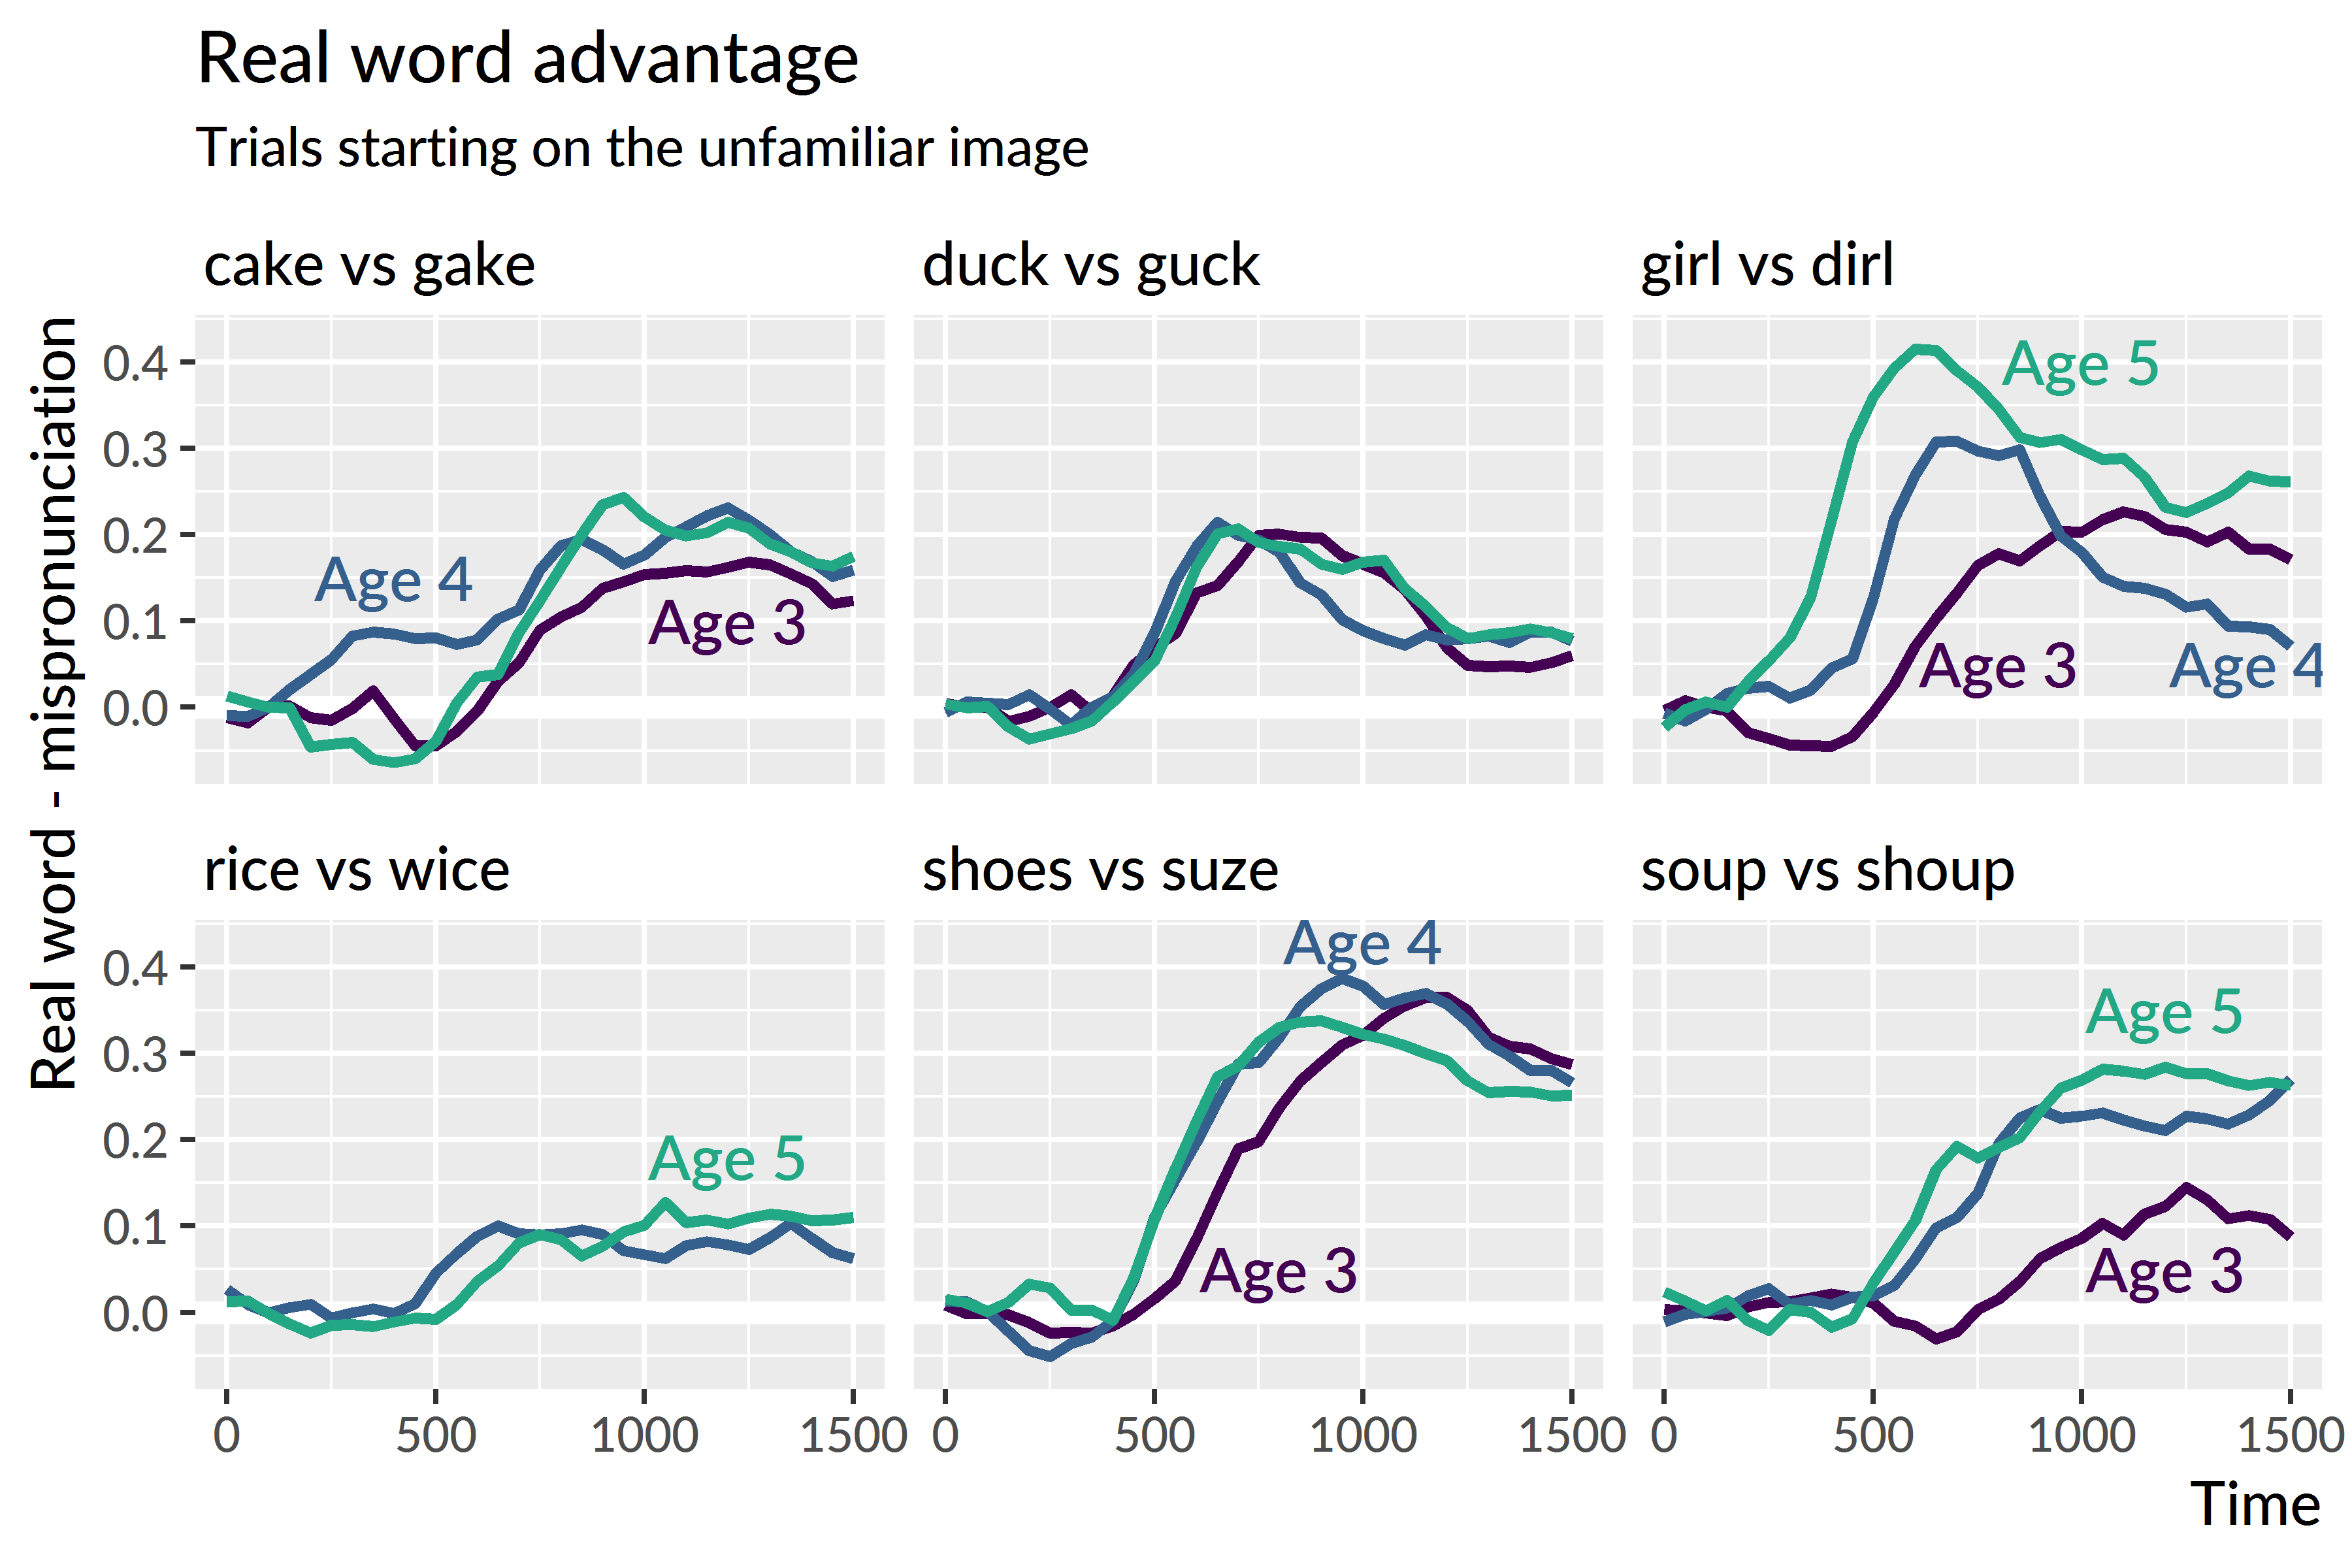 Differences between the average proportion of looks to real words and mispronunciations.